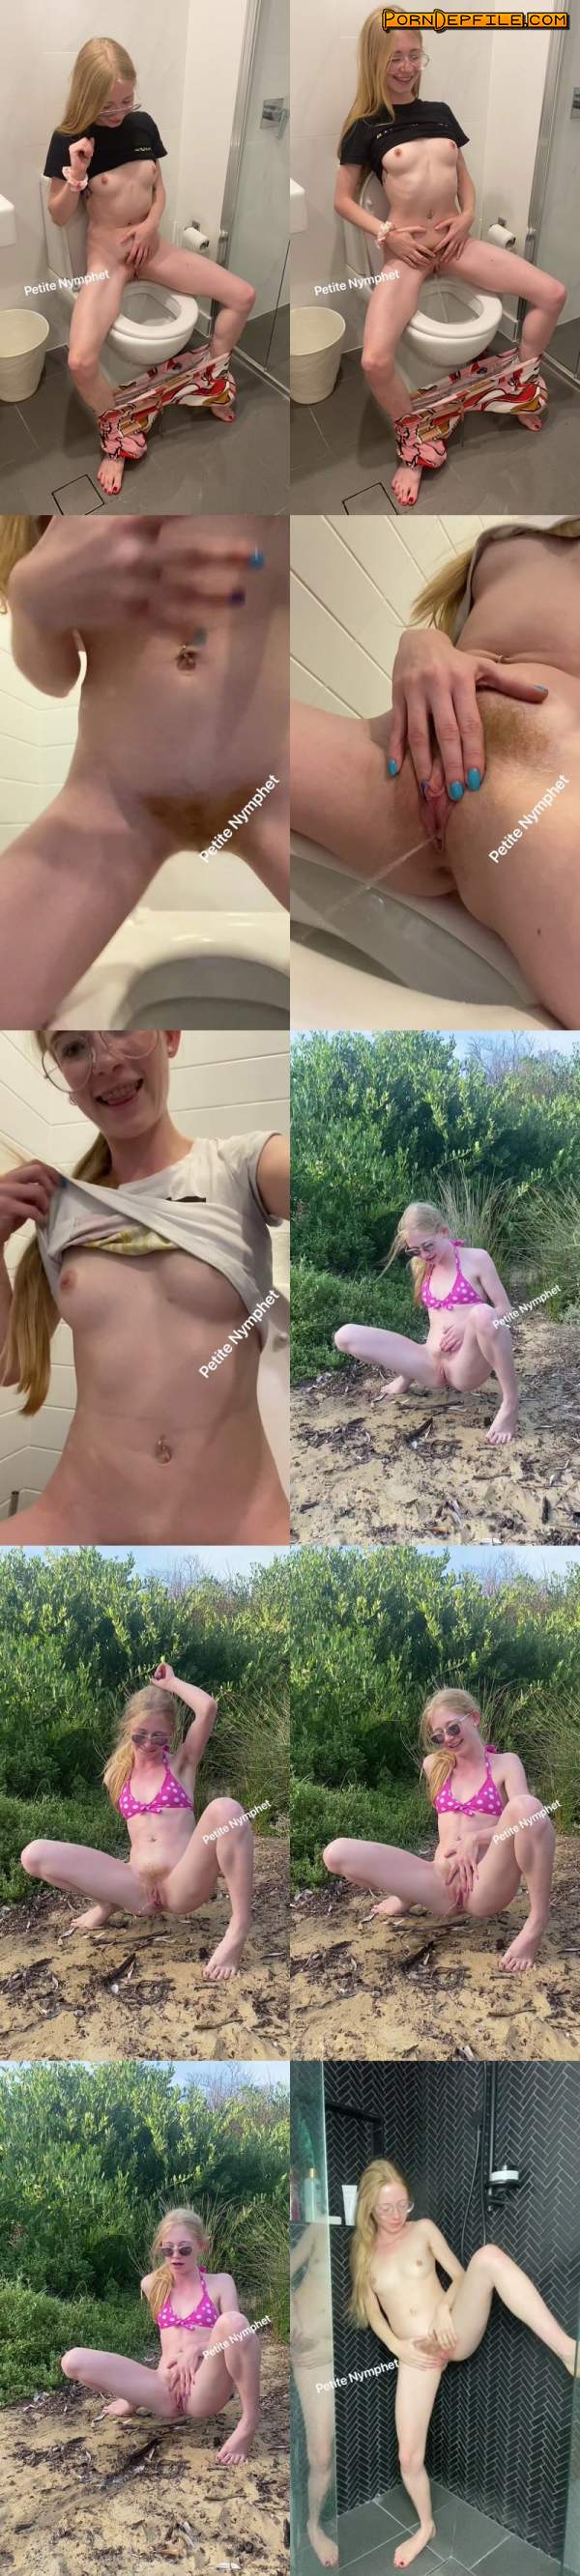 Onlyfans: Naughty_Nymphet, Petite Nymphet - Piss Compilation 5 (HD Porn, Solo, Pissing) 1920p